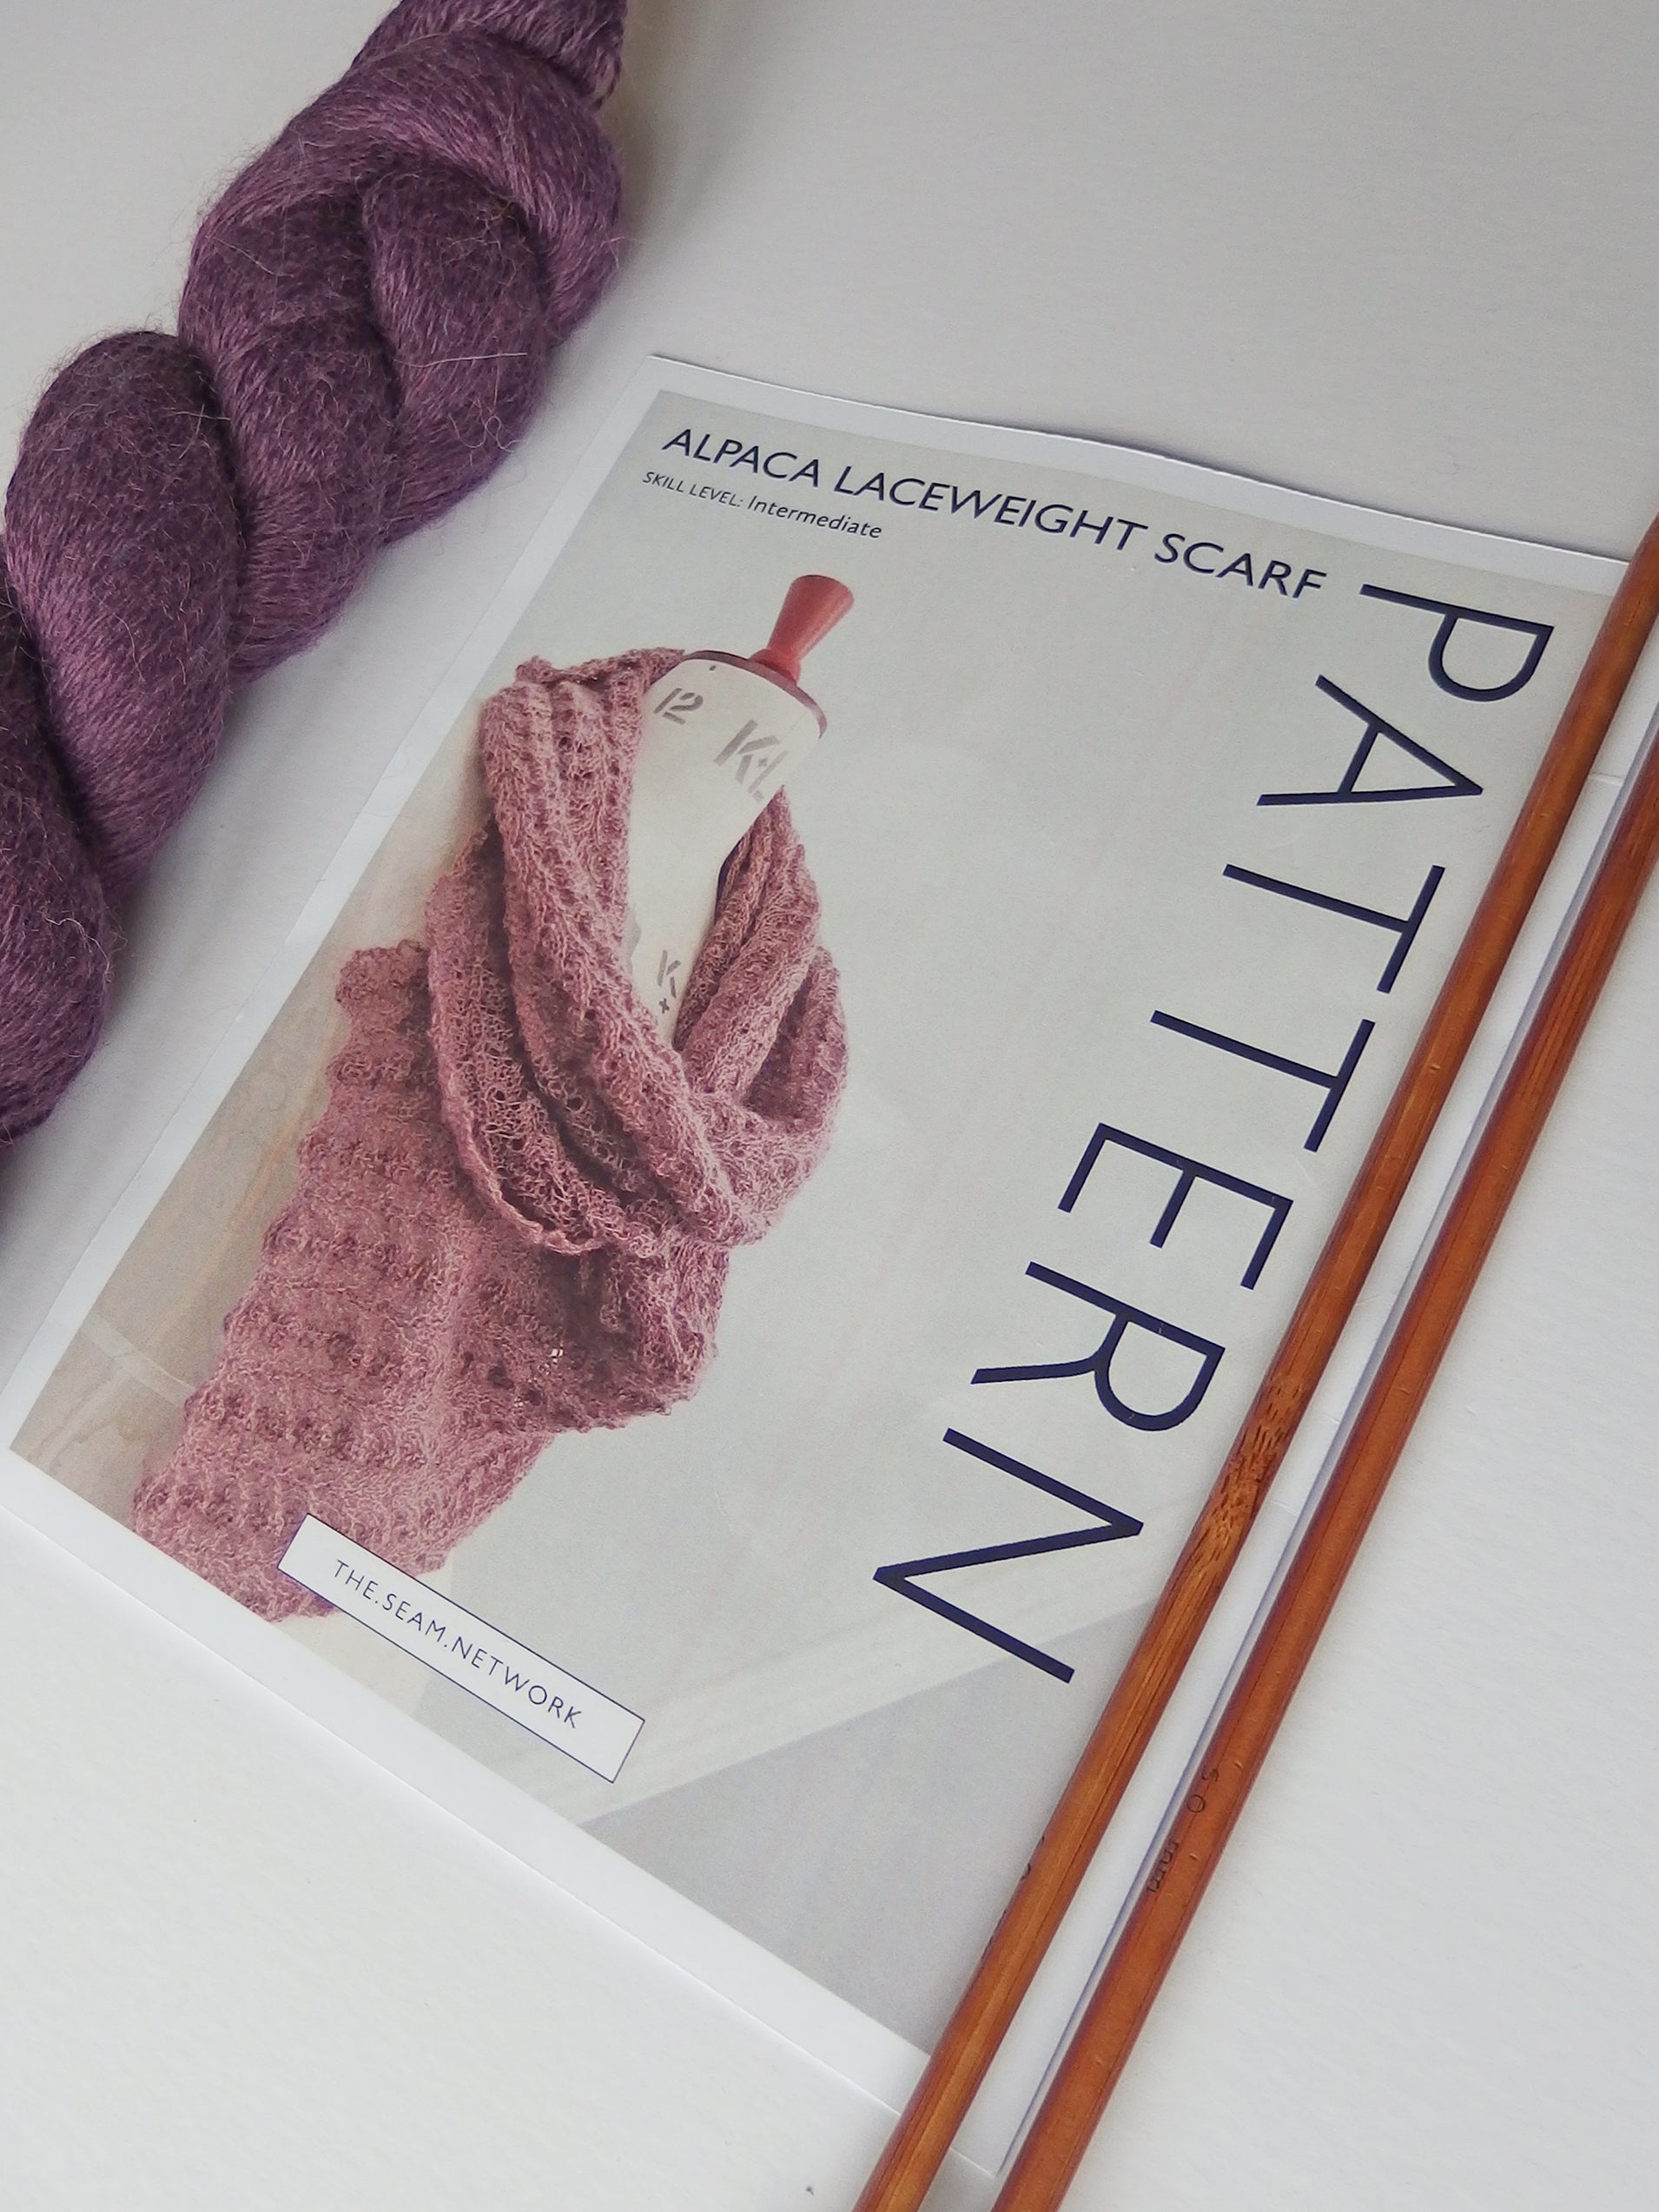 Learn to Knit: Summer Classes at Seam Haberdashery